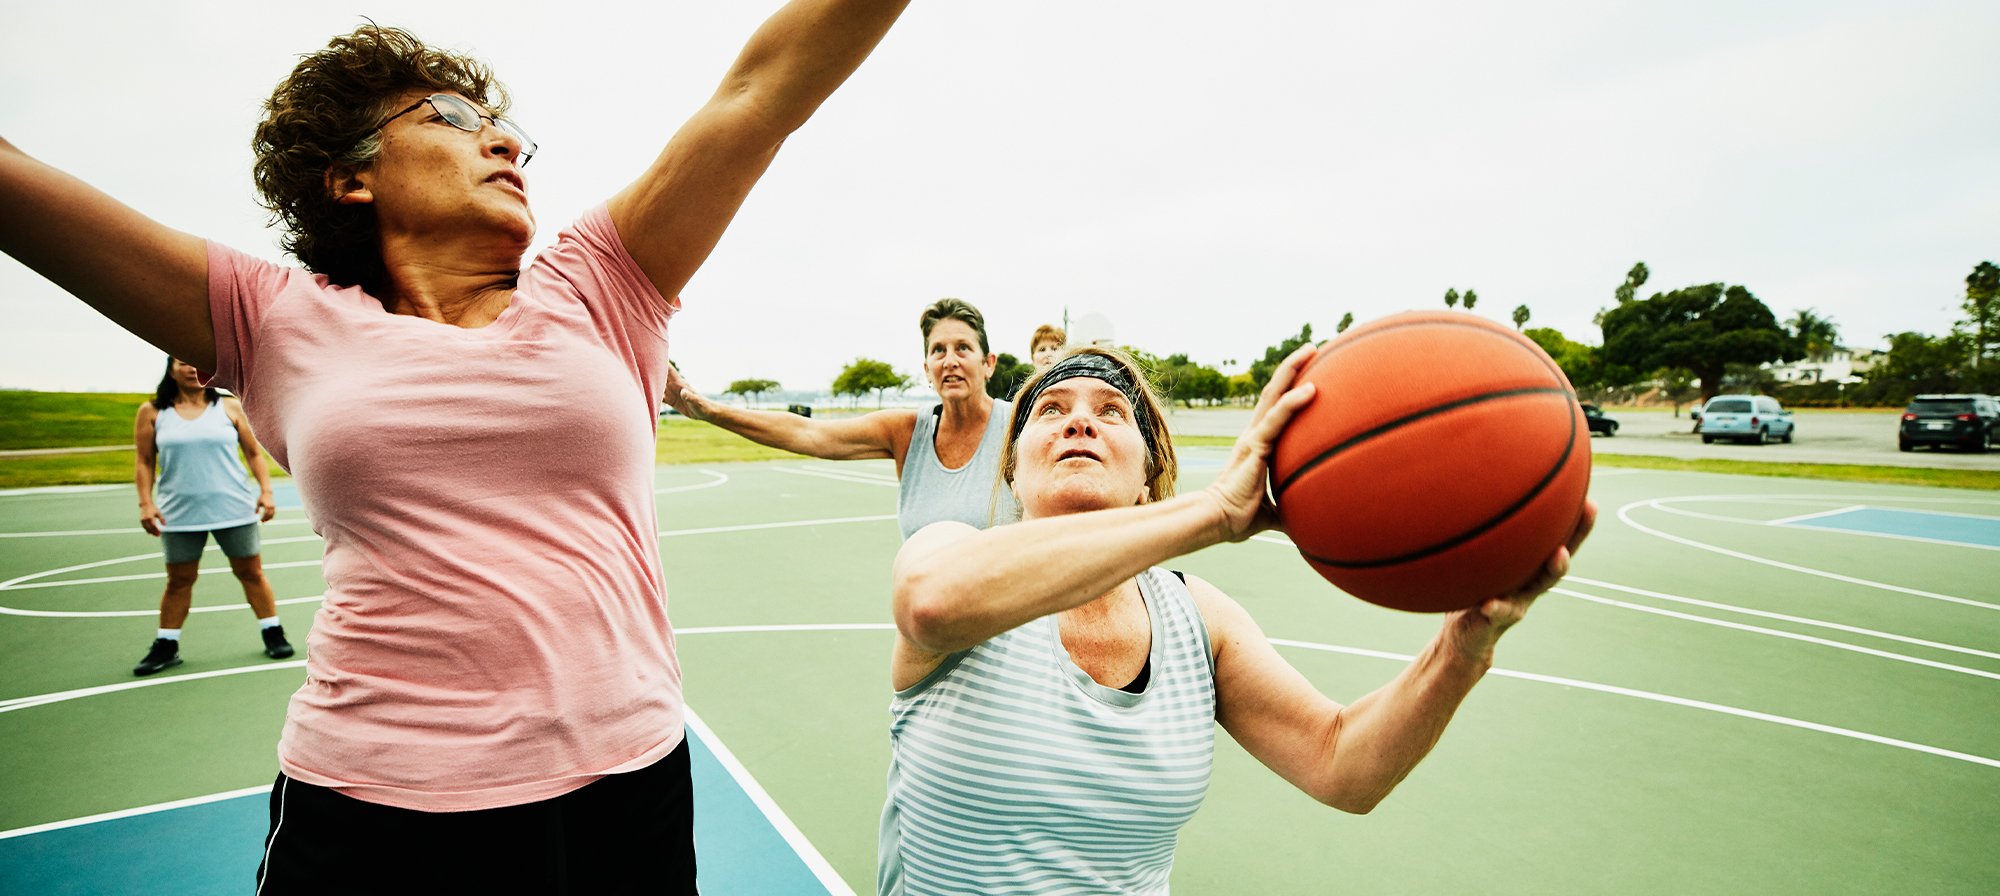 Granny Basketball and Other Inspiring Ways to Stay Active and Fit for Life